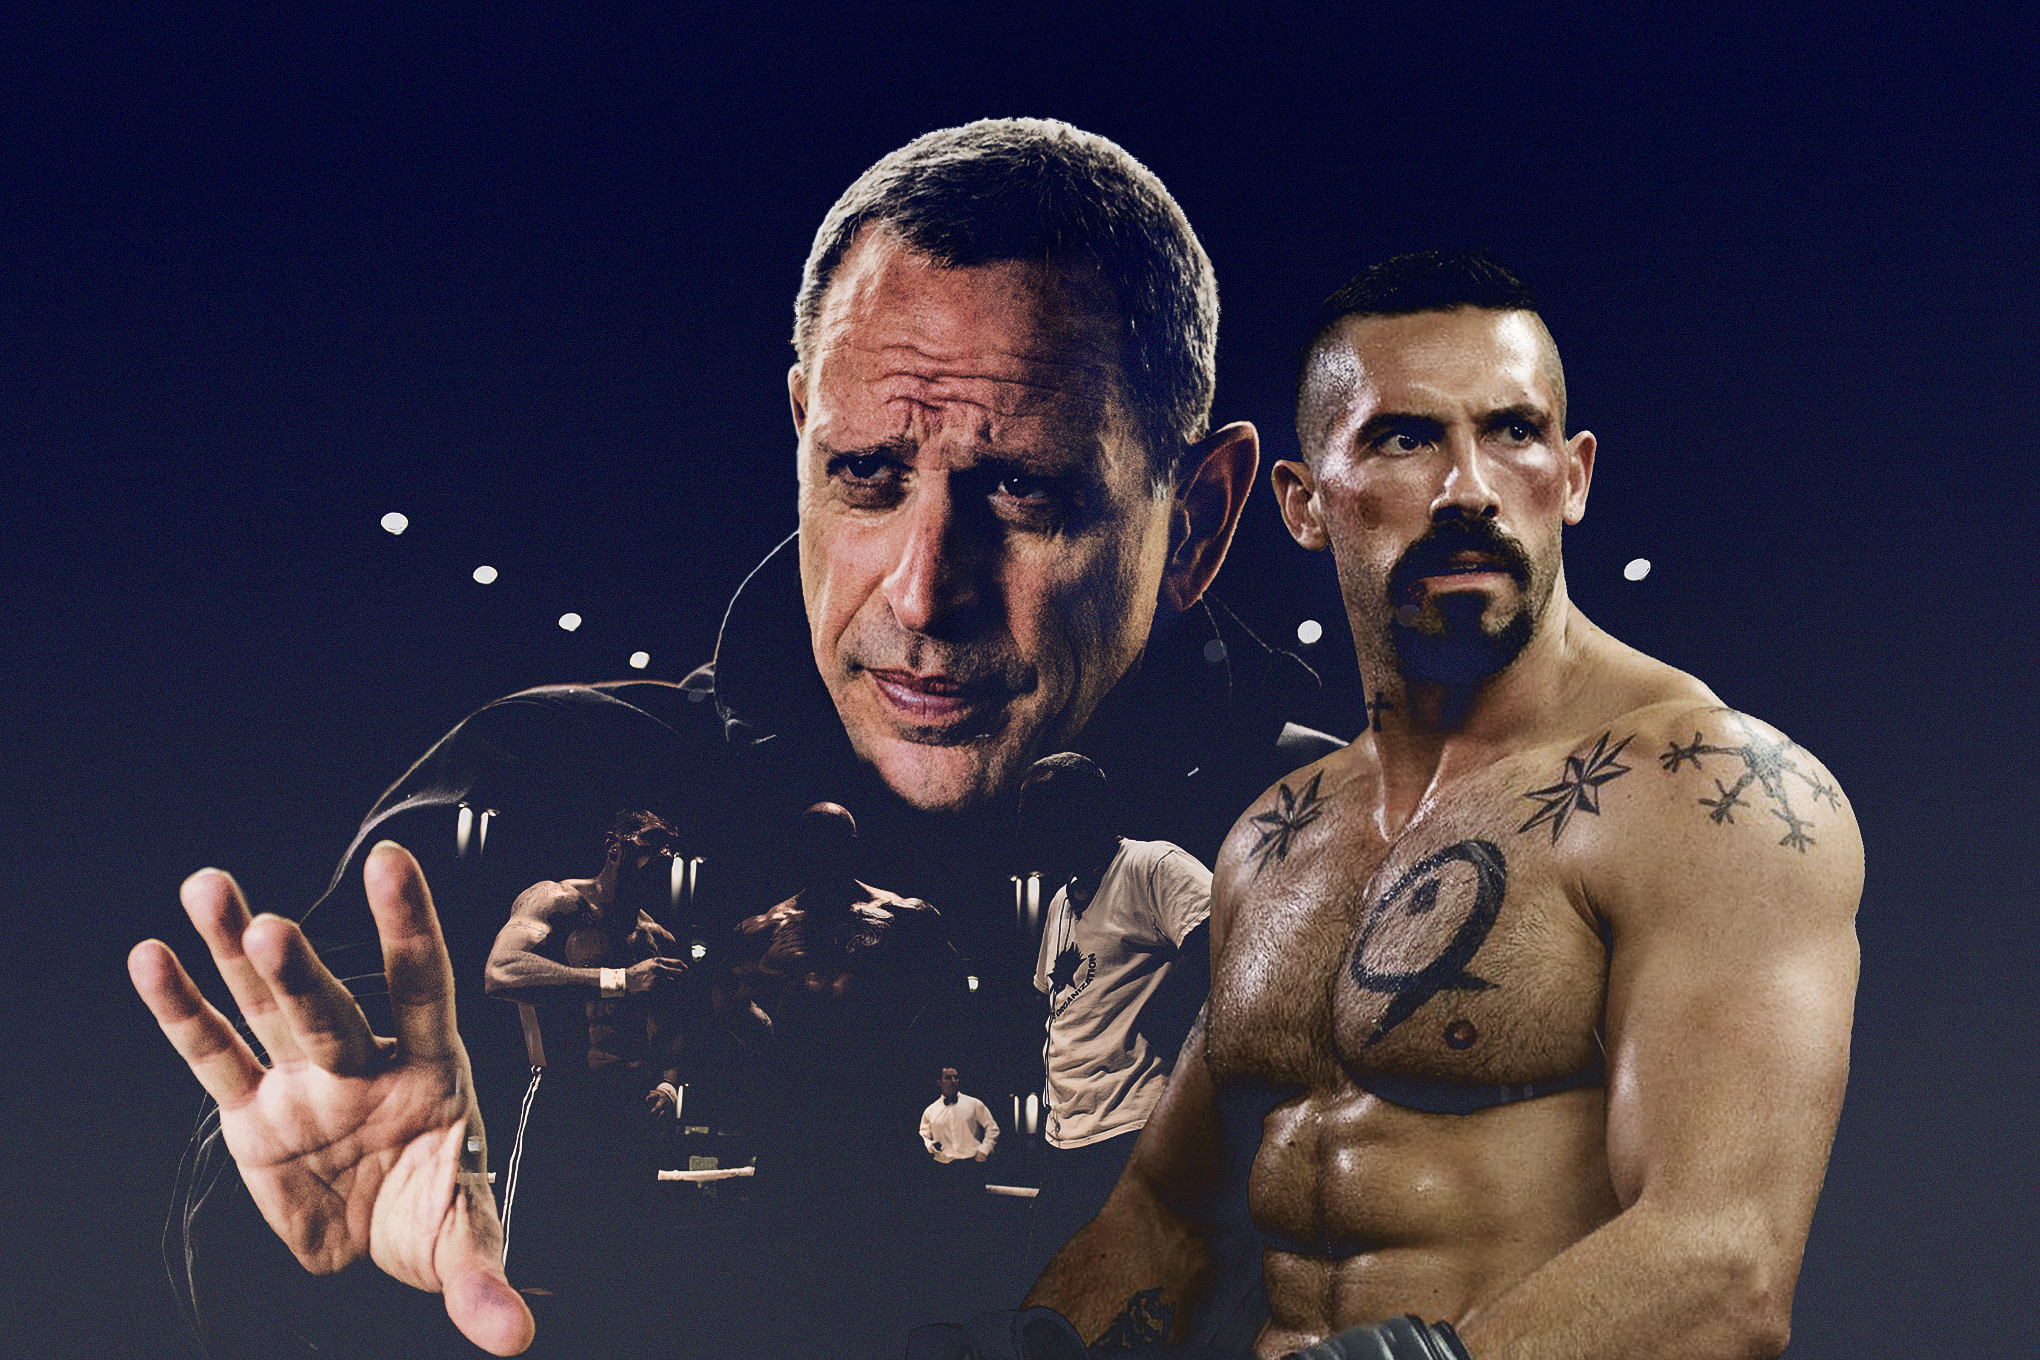 Director Isaac Florentine and stuntman/actor Scott Adkins collaged against a purple background